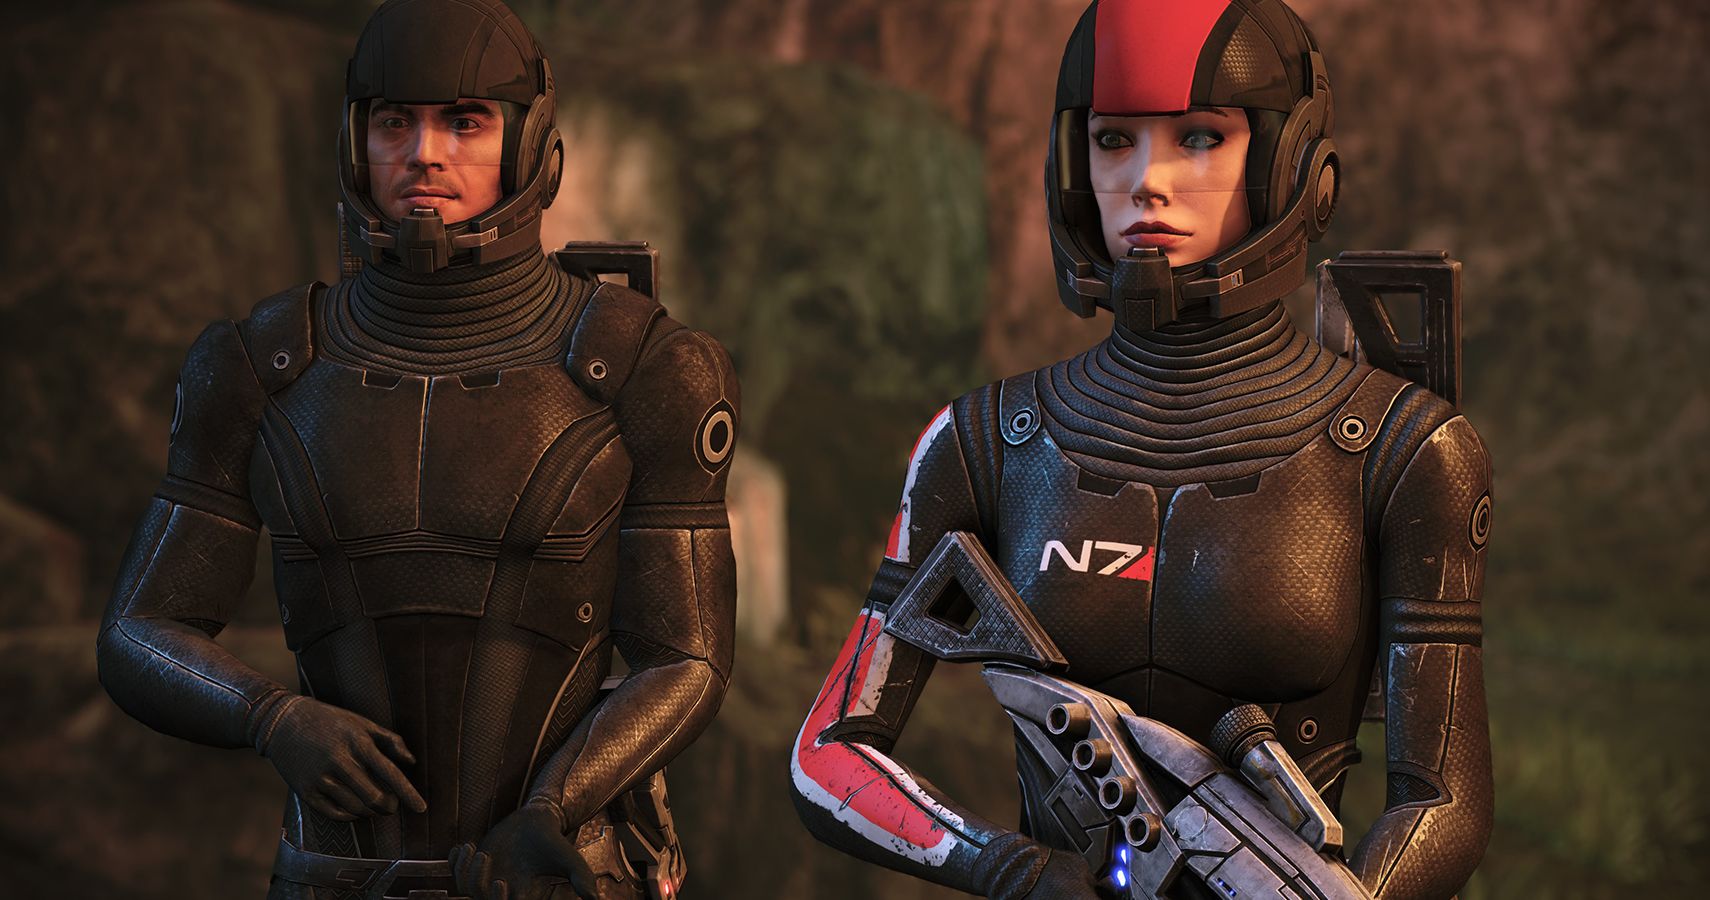 Mass Effect Legendary Edition, two characters standing side by side, one male, one female, holding guns